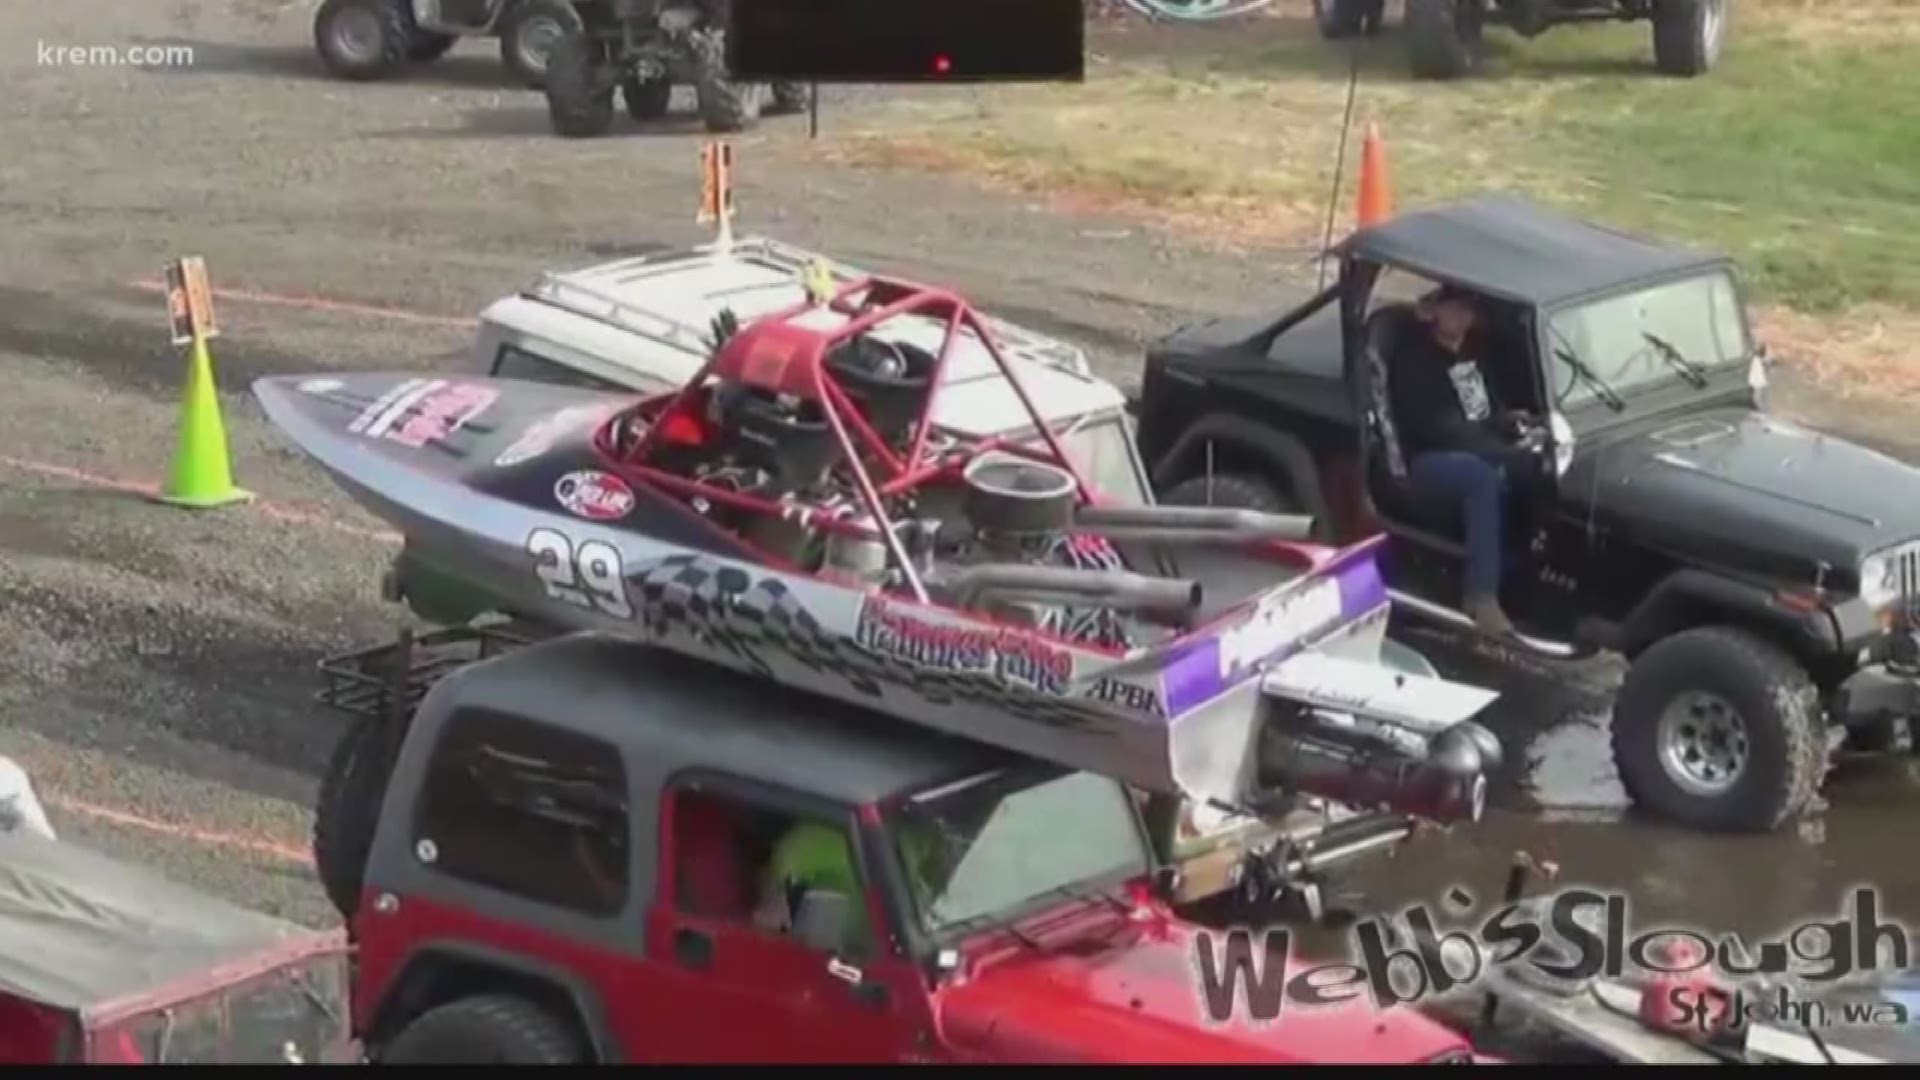 Sprint boat flies on top of Jeep at boat race in St. John